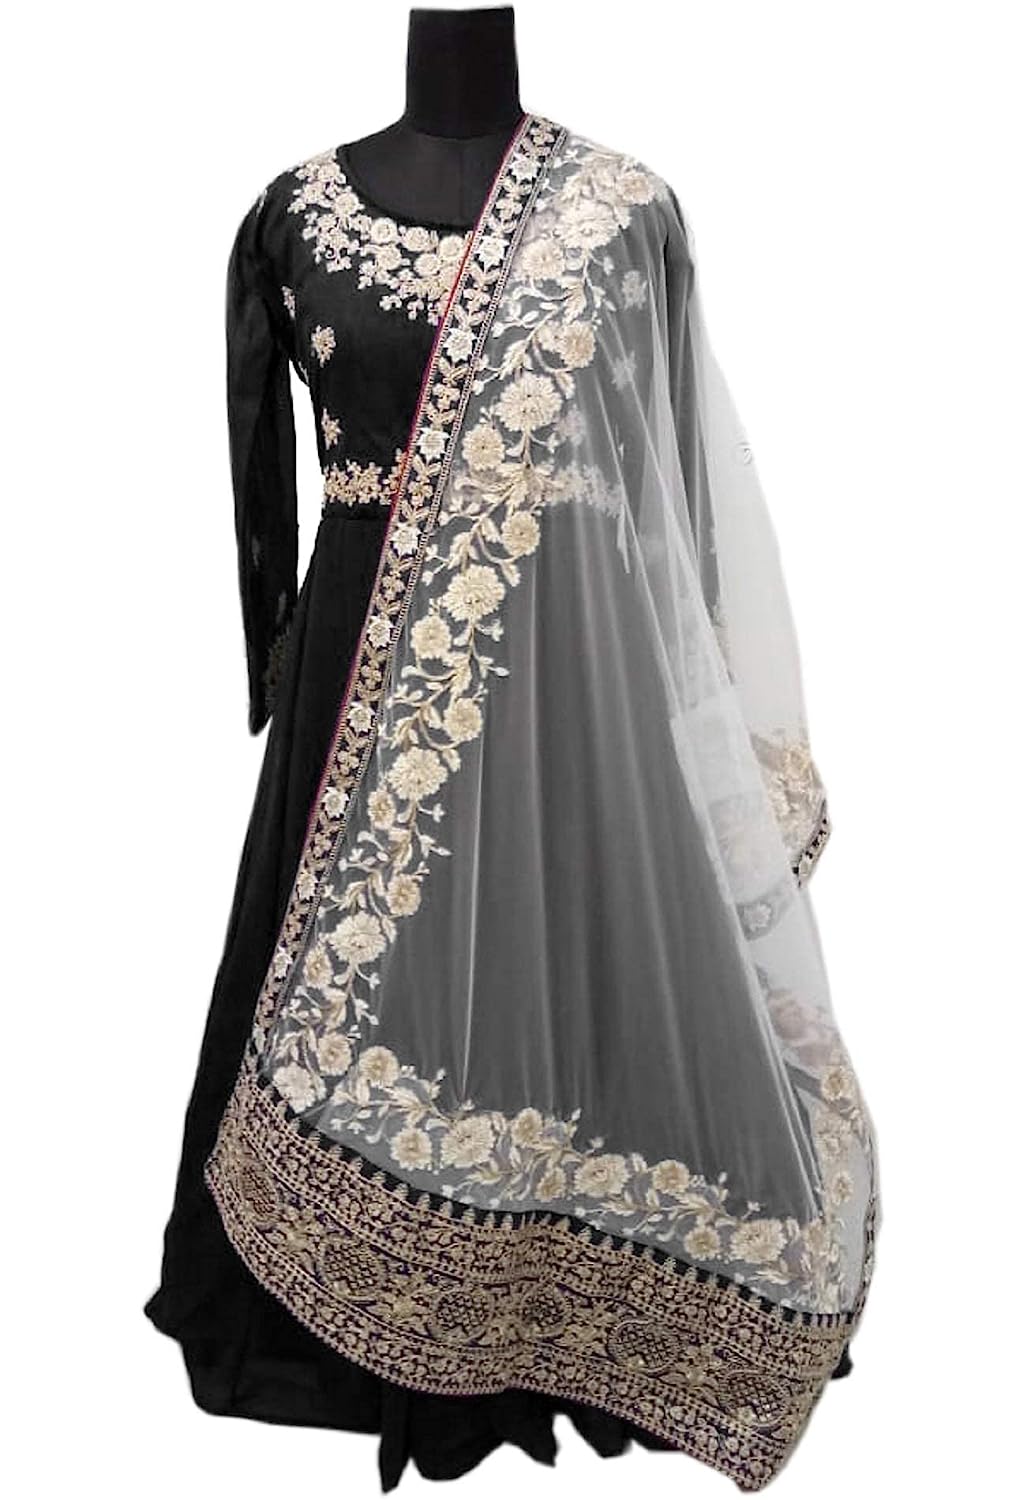 Divine International Trading Co Women's Faux Georgette Embroidery Salwar Suit With Dupatta Material -  salwar suits in Sri Lanka from Arcade Online Shopping - Just Rs. 8999!